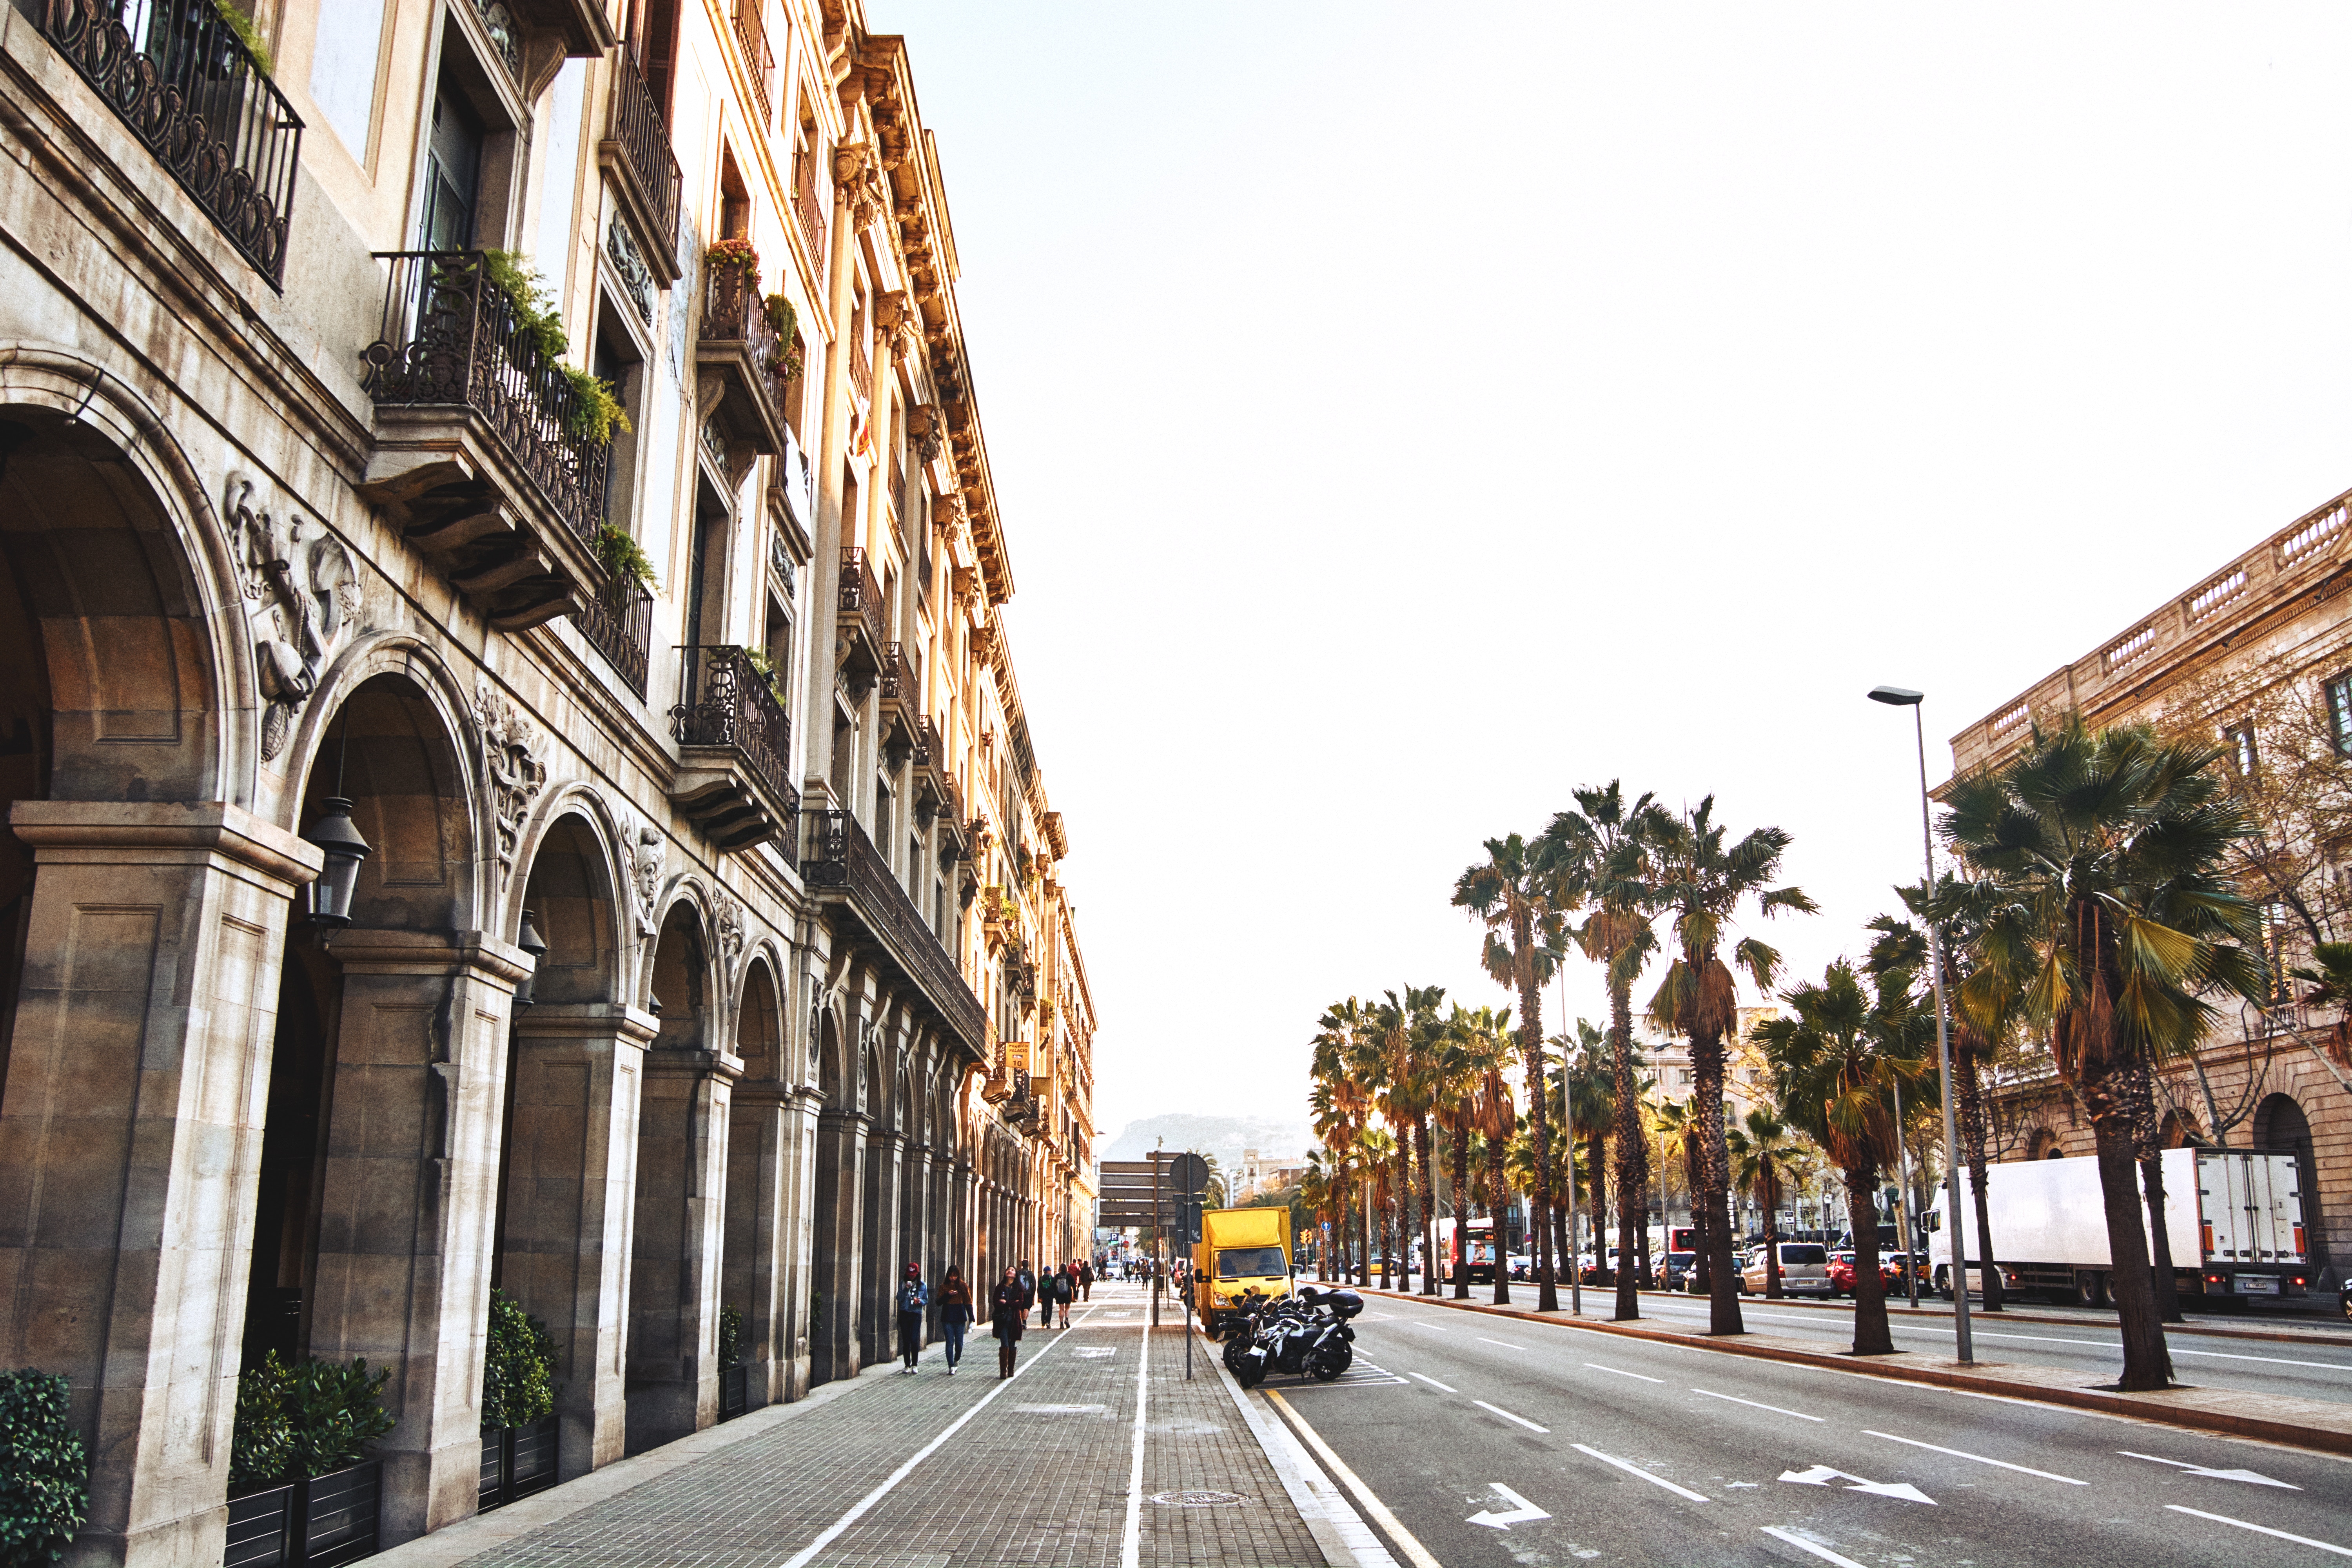 BREATHTAKING SPOTS TO VISIT DURING YOUR STAY IN BARCELONA!